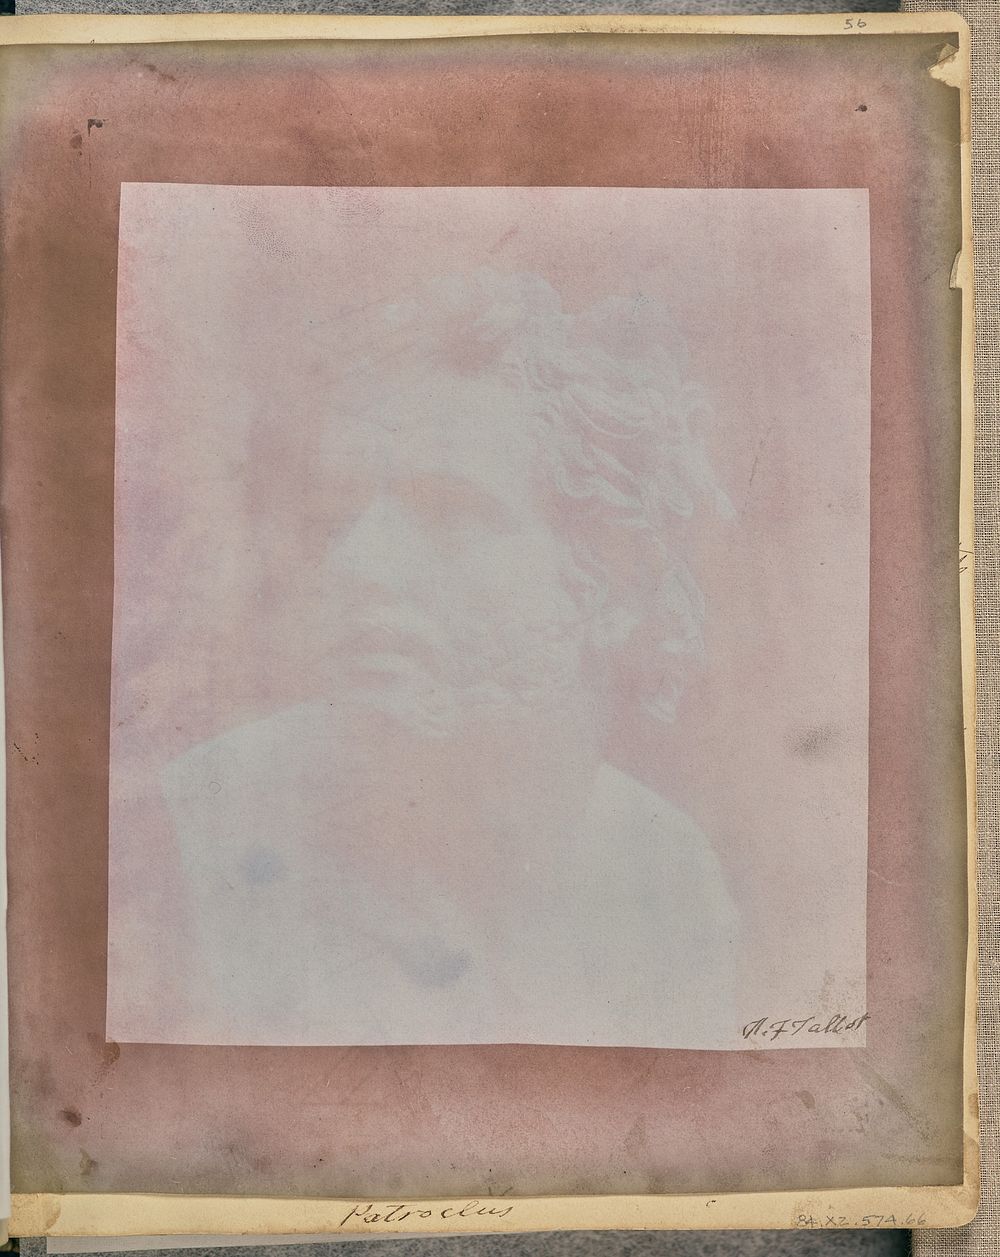 Bust of Patroclus. by William Henry Fox Talbot